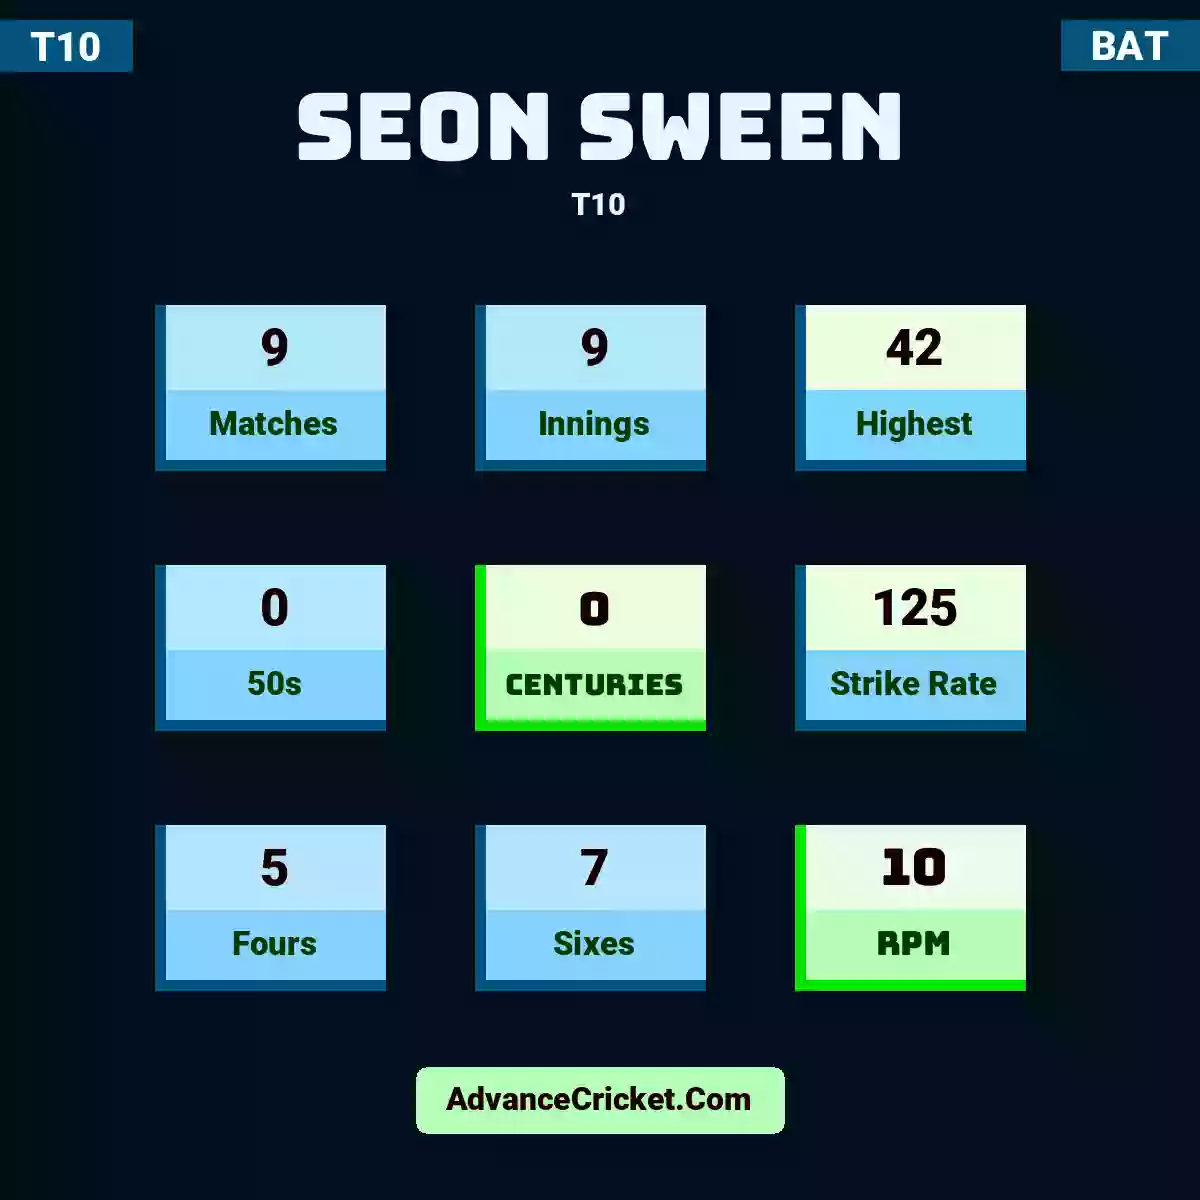 Seon Sween T10 , Seon Sween played 9 matches, scored 42 runs as highest, 0 half-centuries, and 0 centuries, with a strike rate of 125. S.Sween hit 5 fours and 7 sixes, with an RPM of 10.